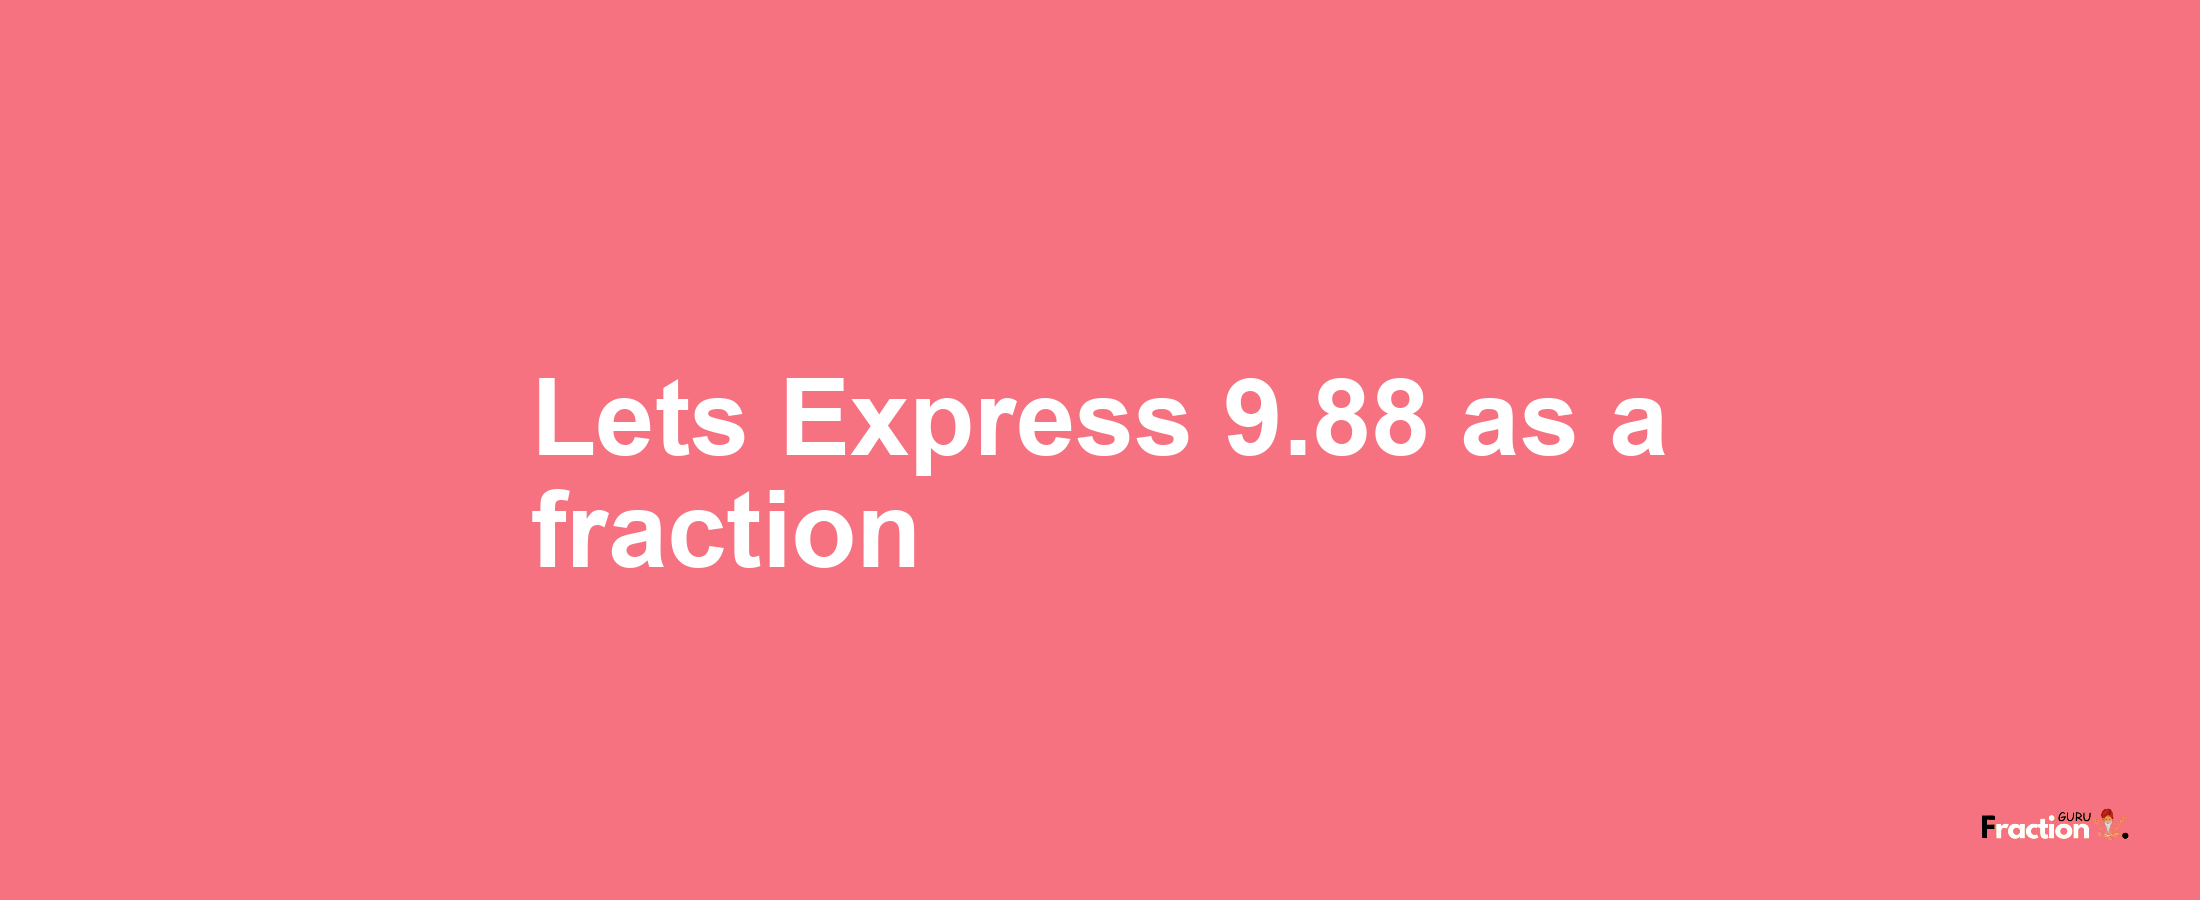 Lets Express 9.88 as afraction